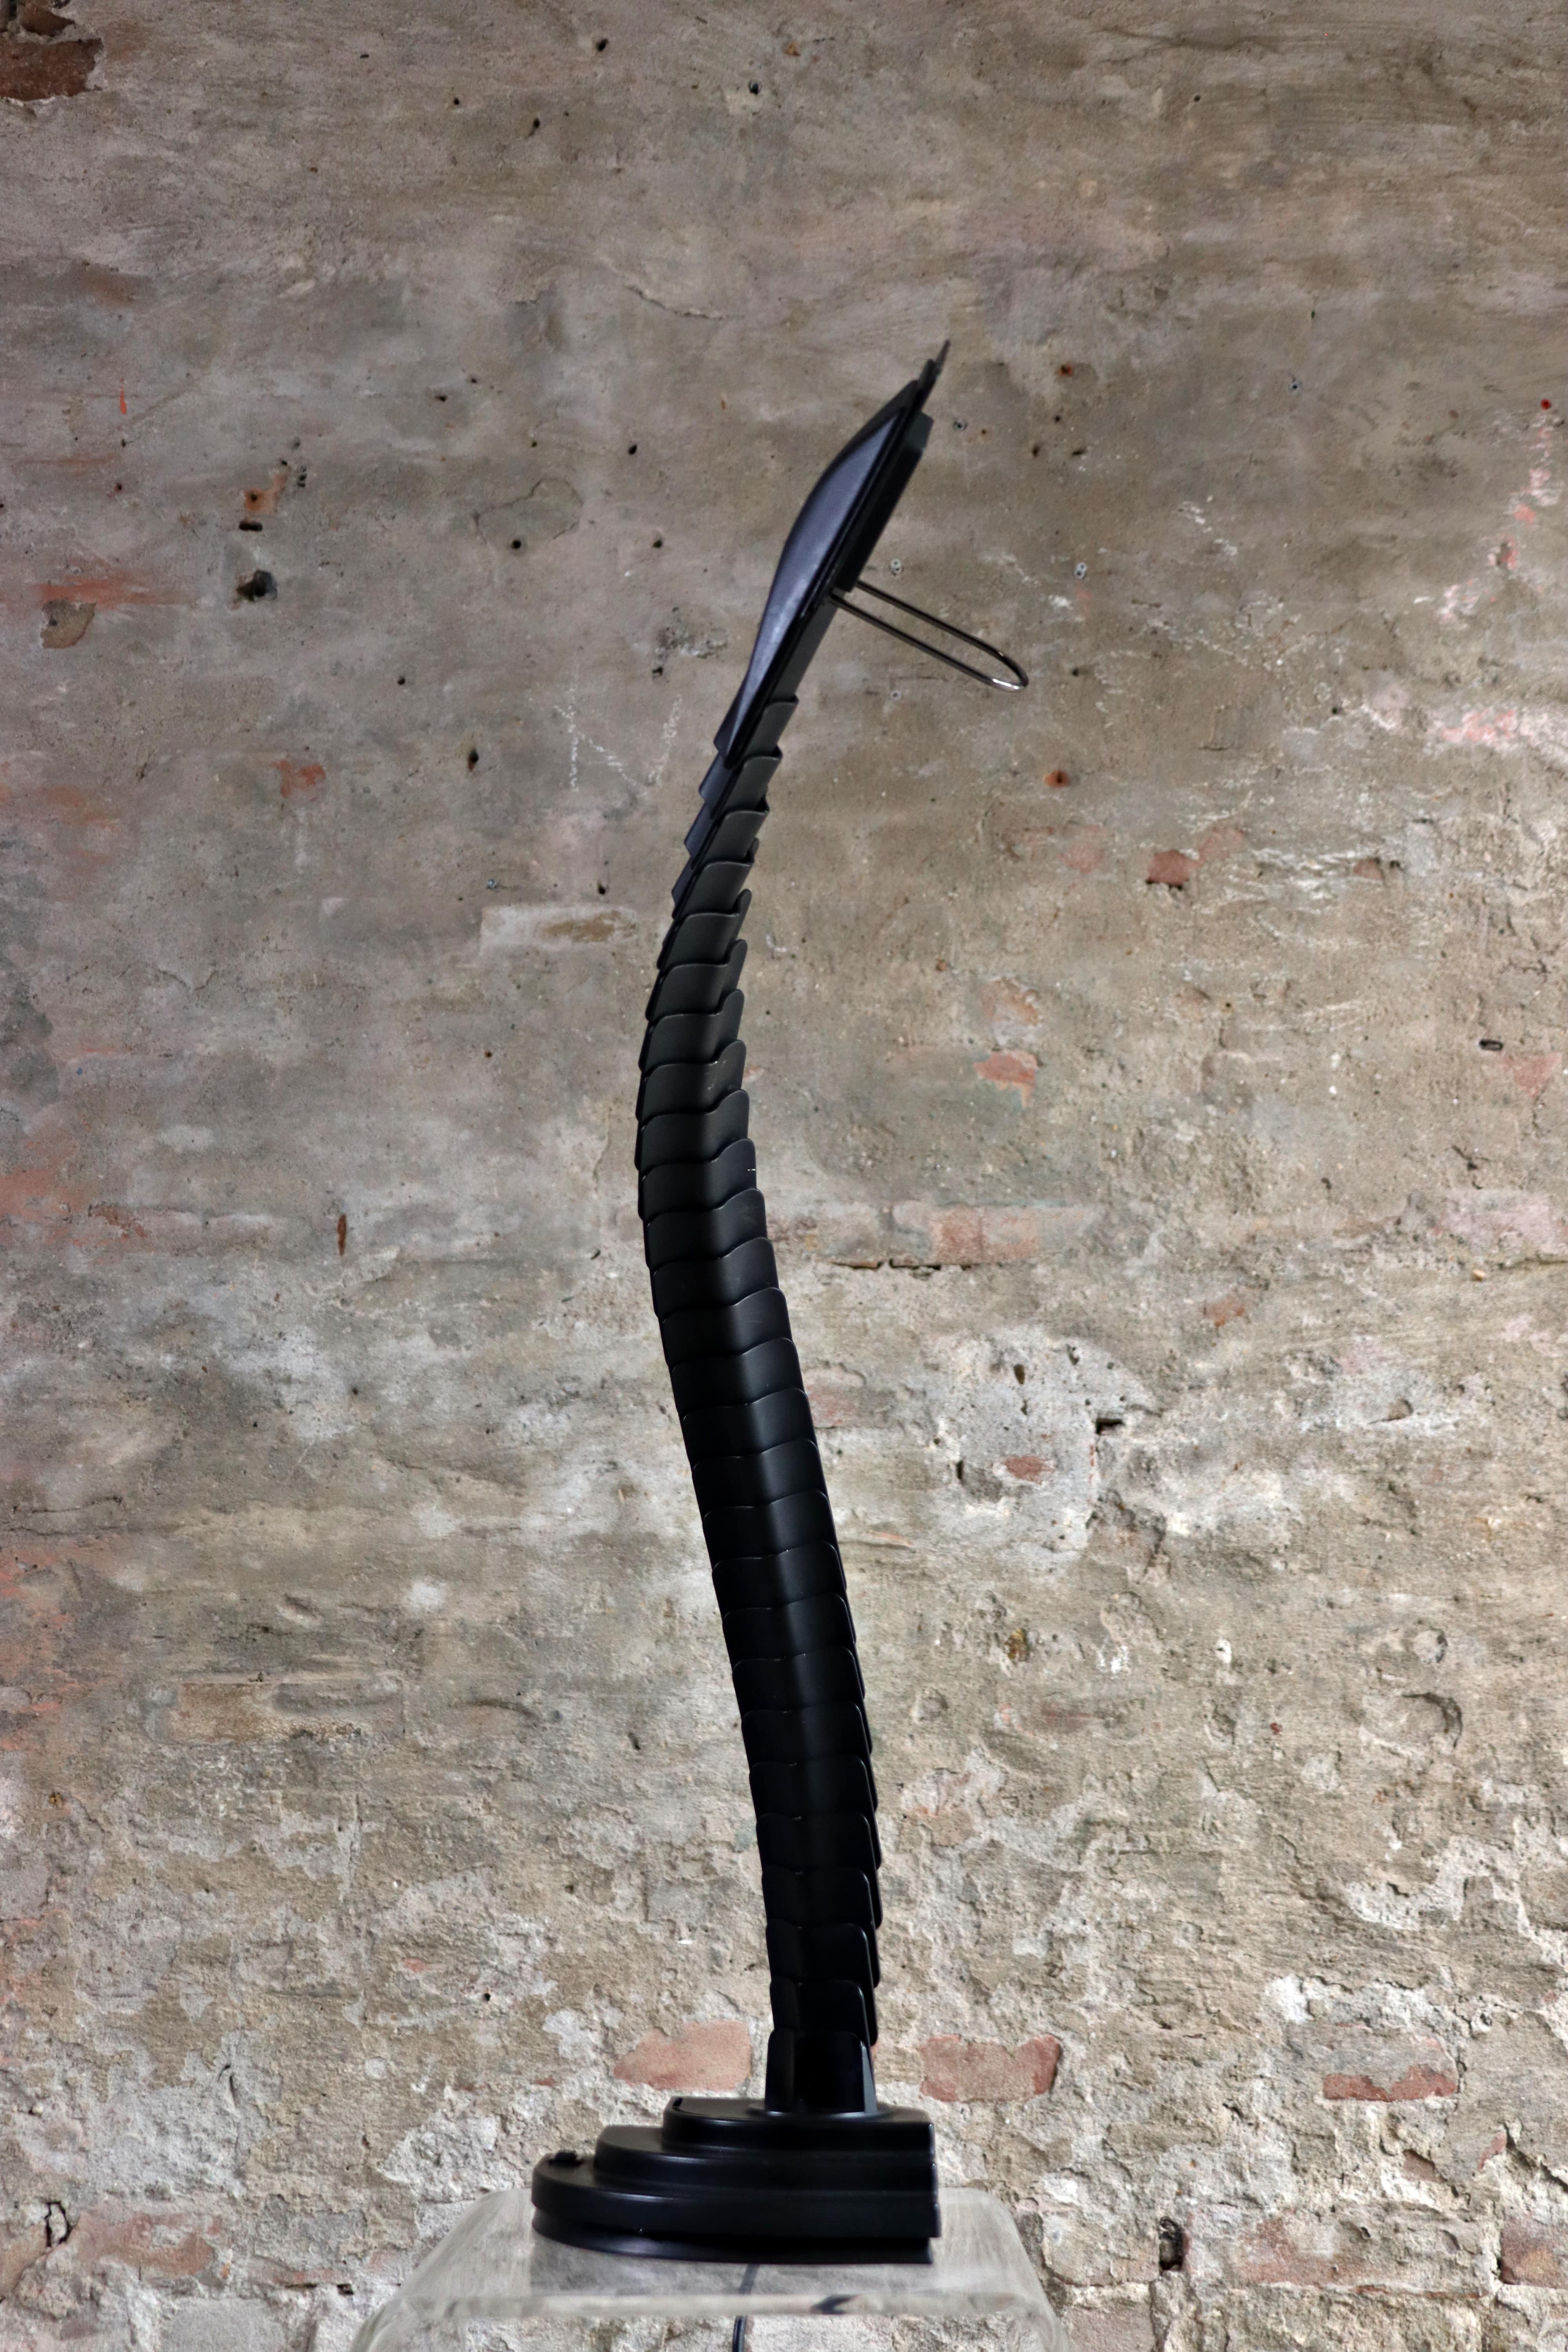 This cool lamp is called Proteo and is designed by Mario Bertorelle for JM RDM Massanzago in Italy in the 1970s. It has scales, so it’s looking like a cobra or dragon. The lamp is inspired by the human spine allow a multitude of creation thanks to